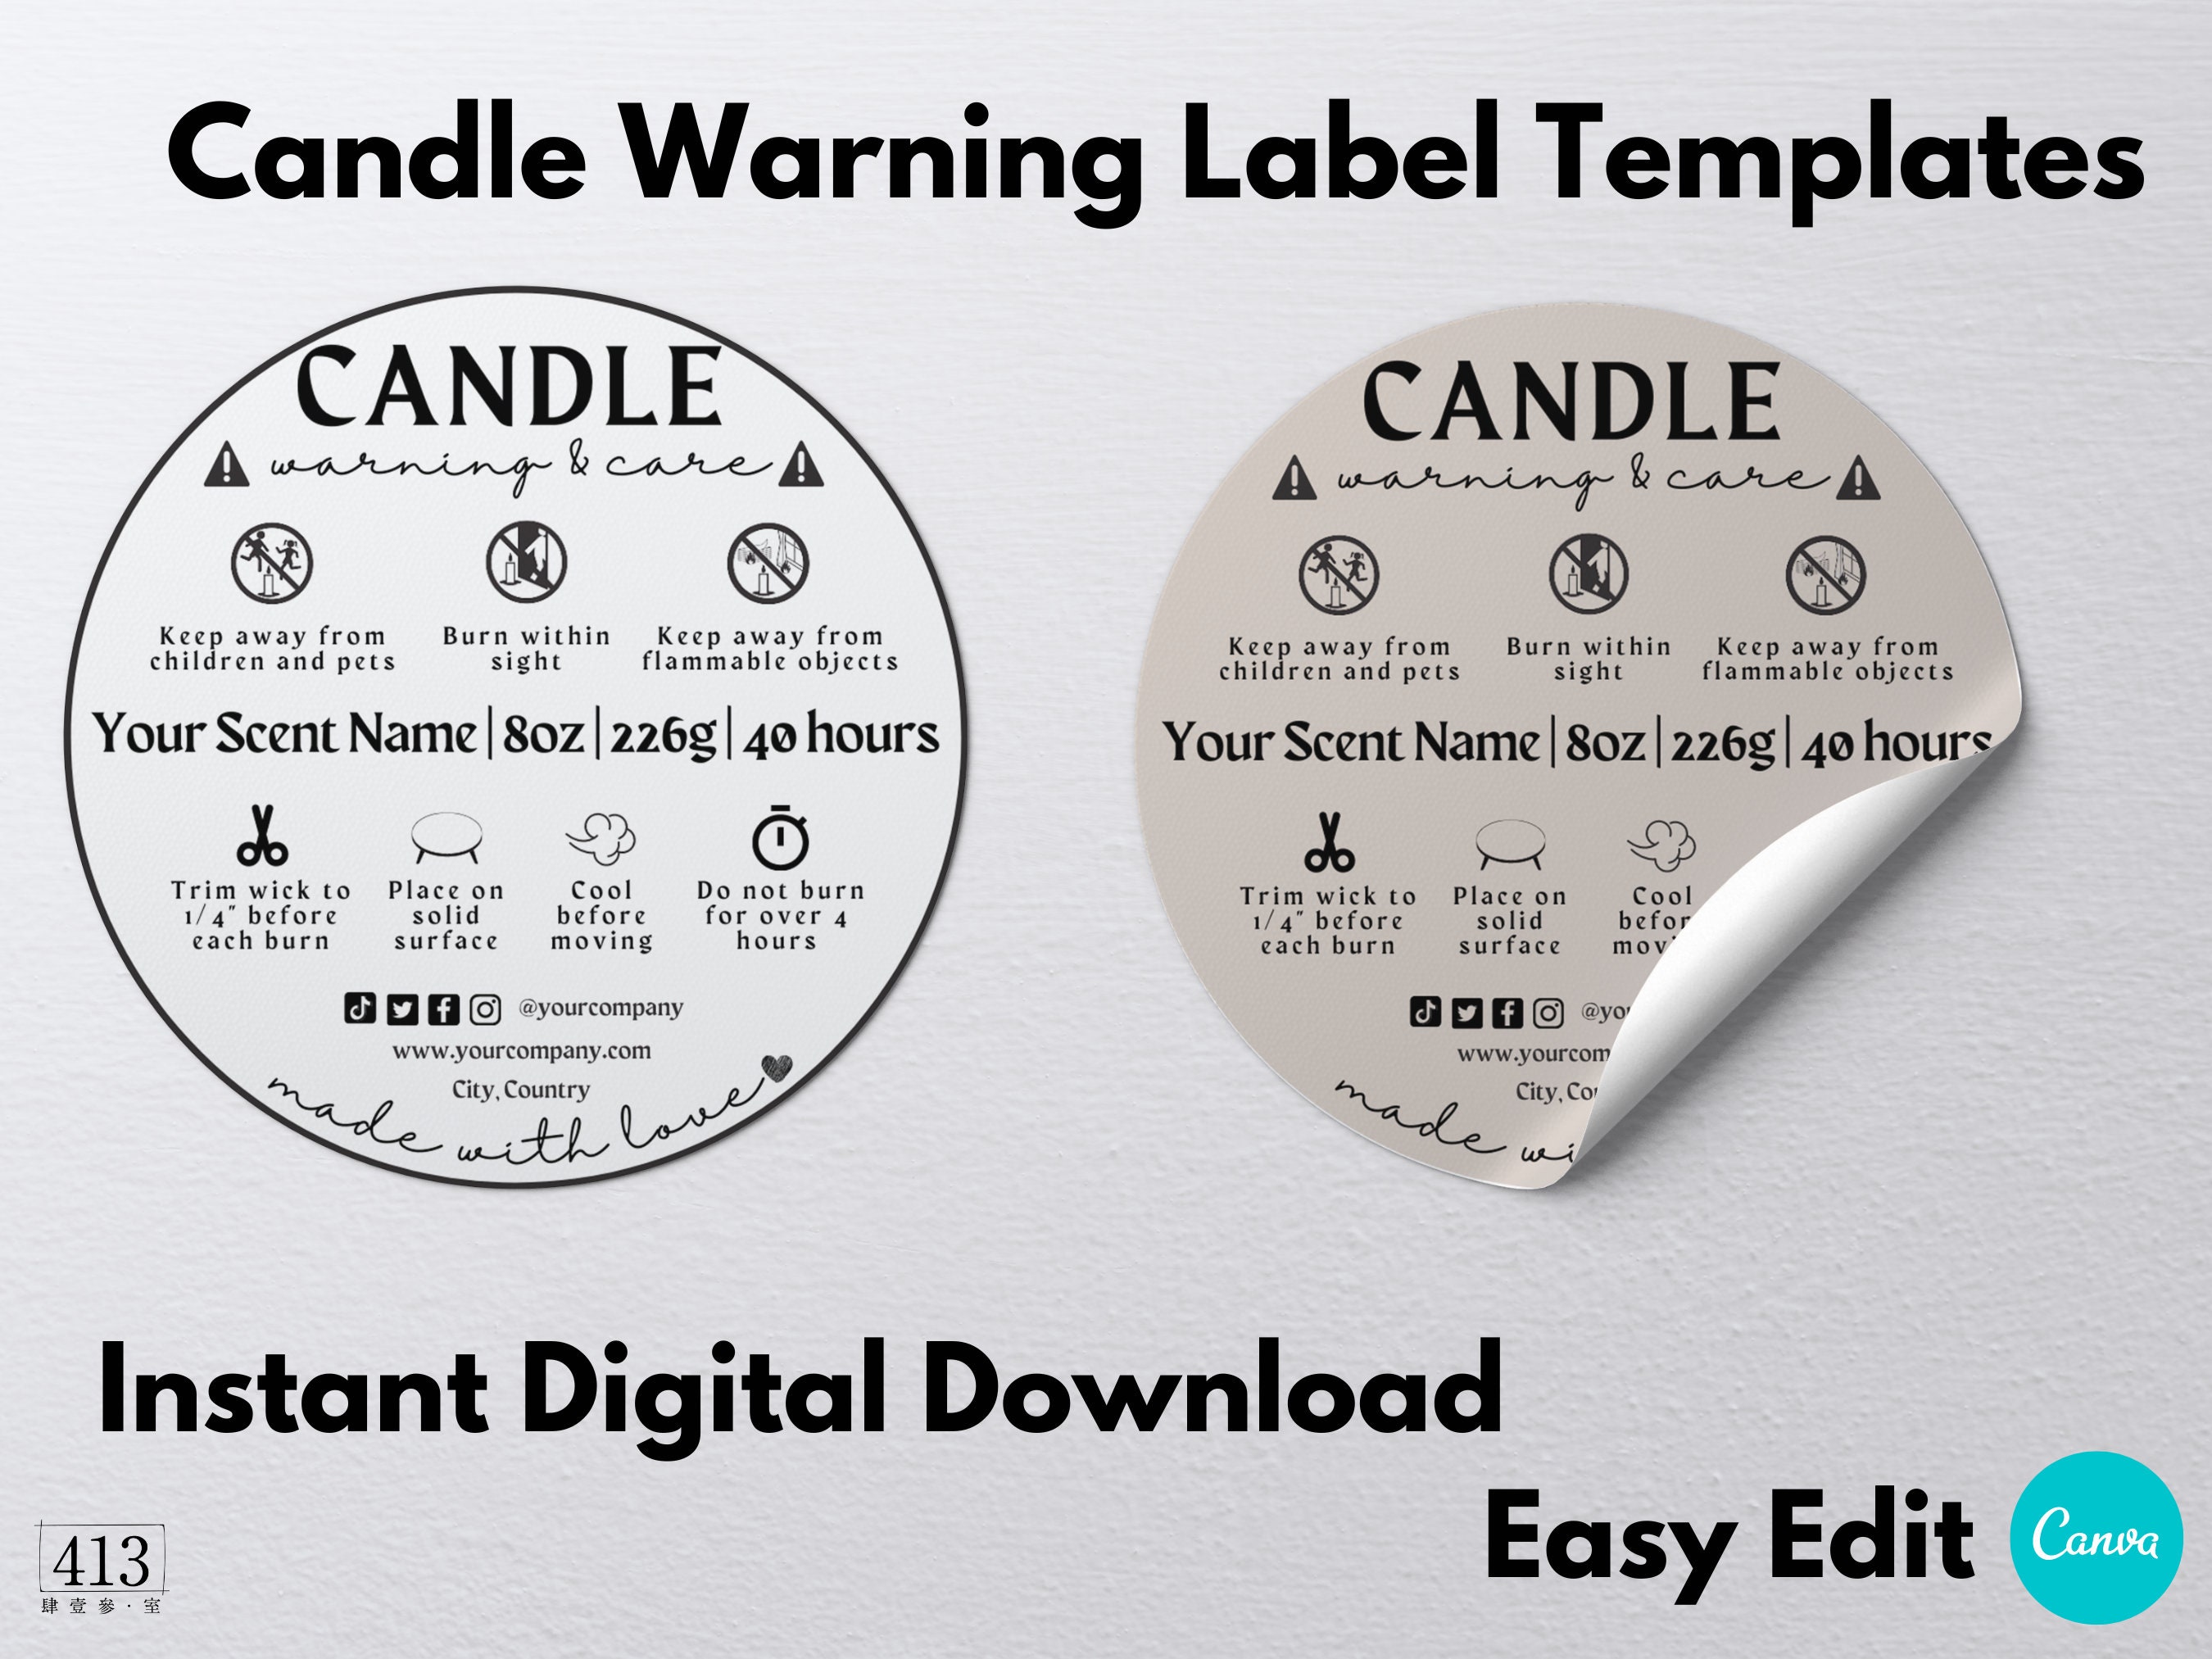 Candle Warning Labels, Candle Warning Stickers, Custom Candle Warning  Labels, Custom Candle Warning Sticker, Customized Candle Warning Label 